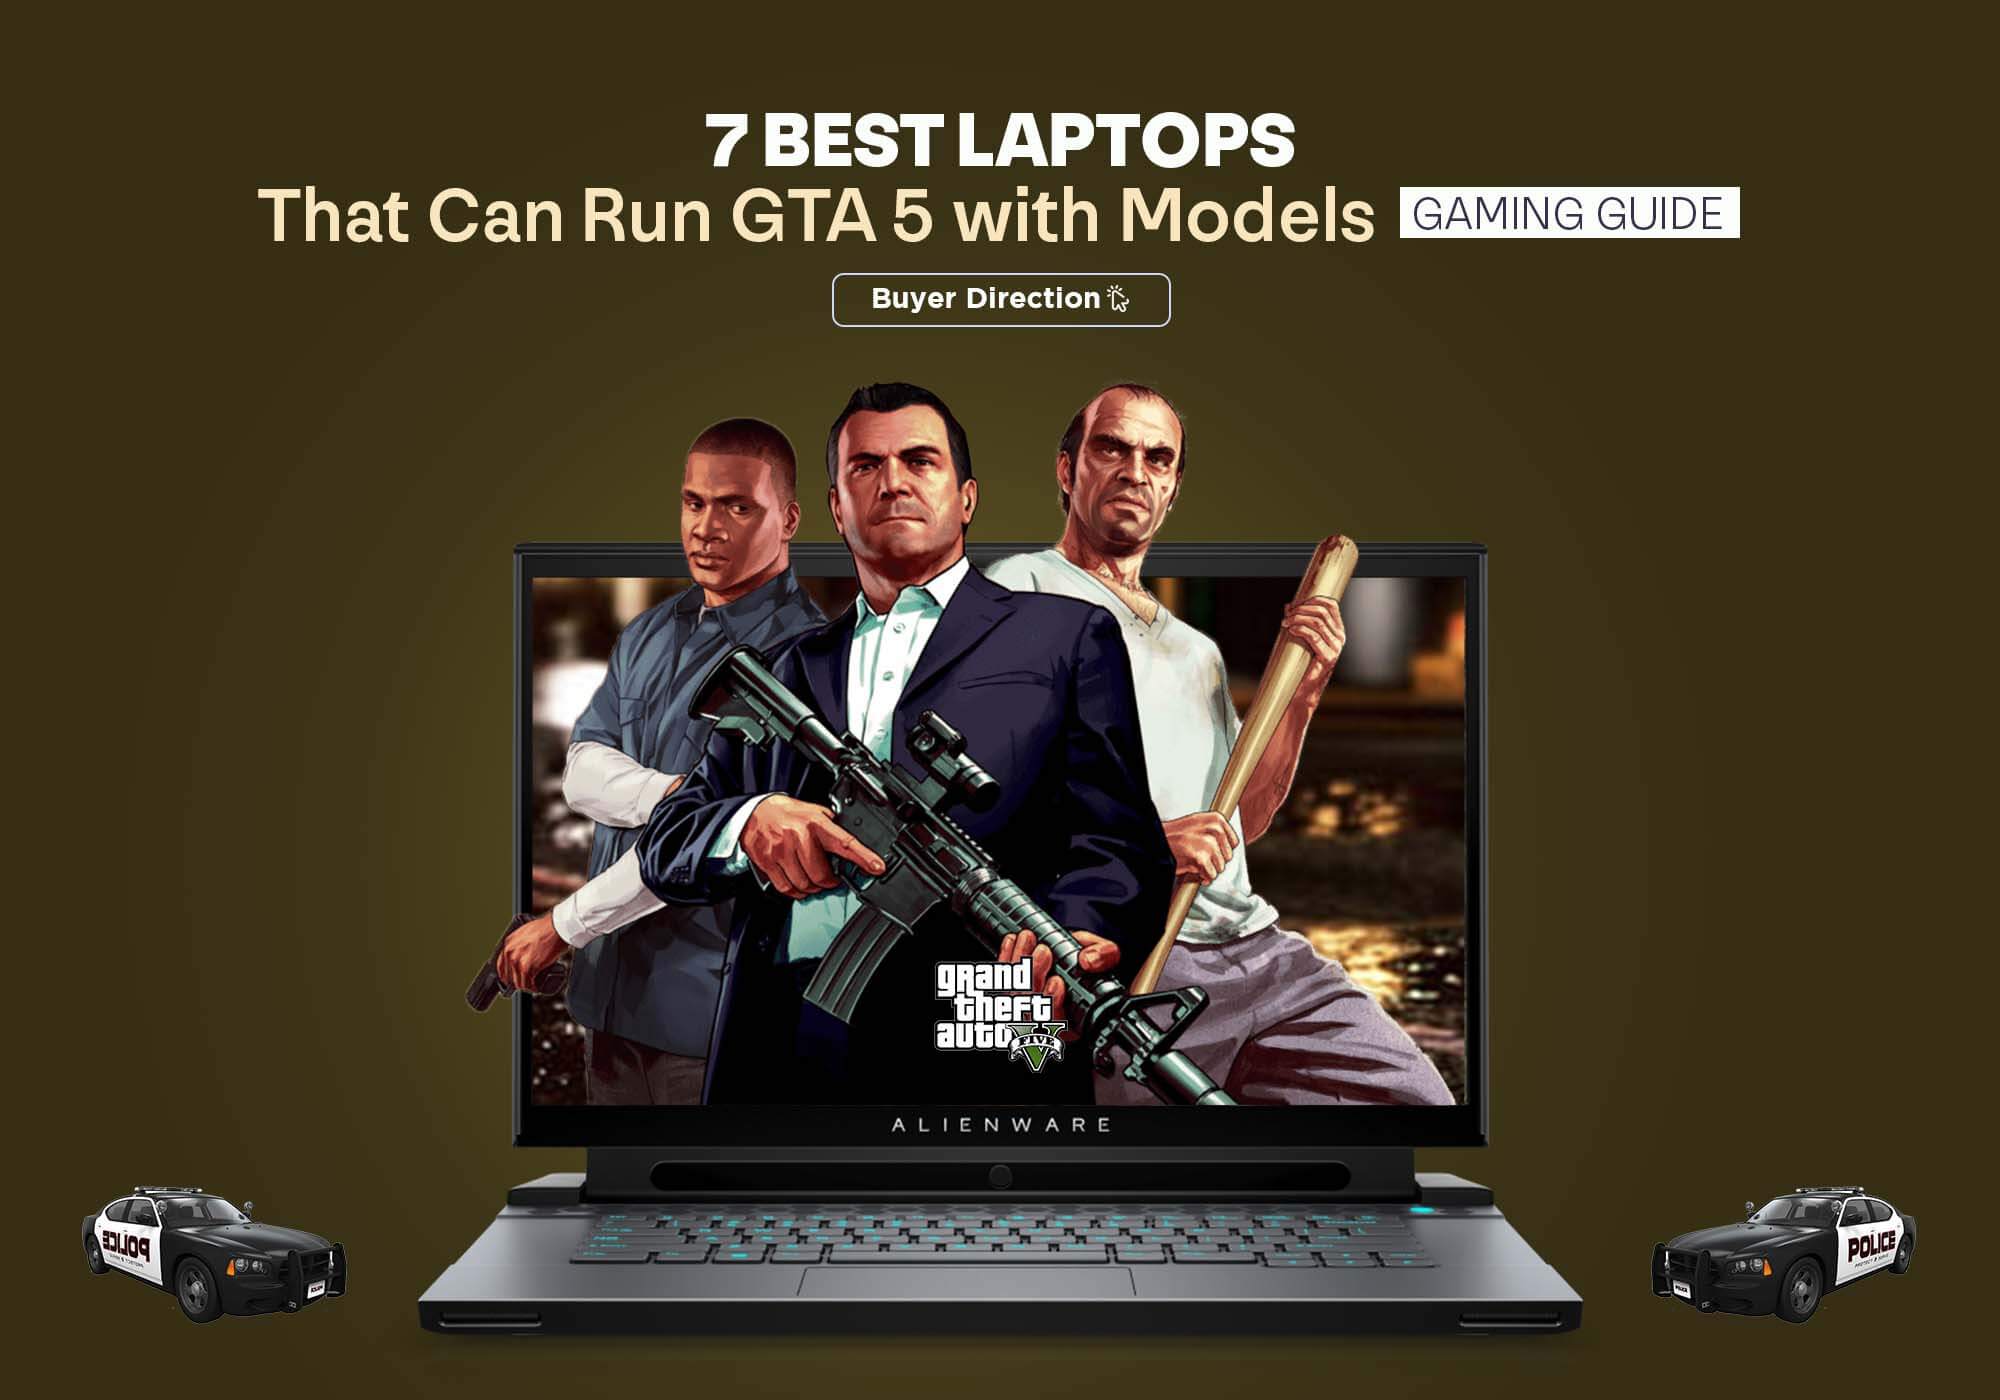 7 Best Laptops That Can Run GTA 5 with Models - Gaming Guide